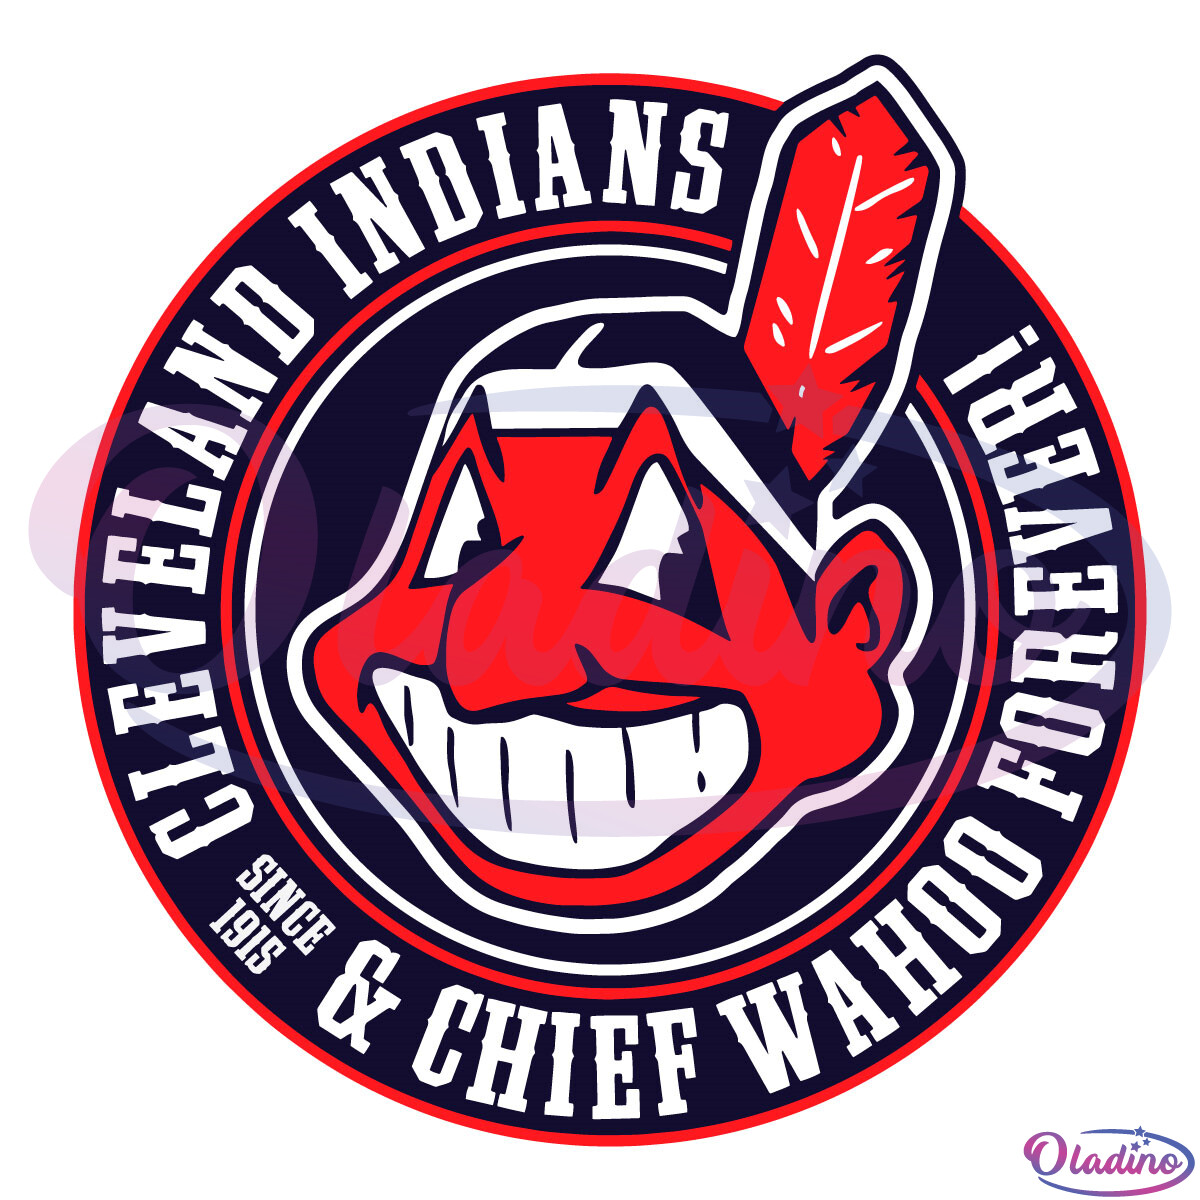 ArtStation - Cleveland Indians and Chief Wahoo Forever since 1915